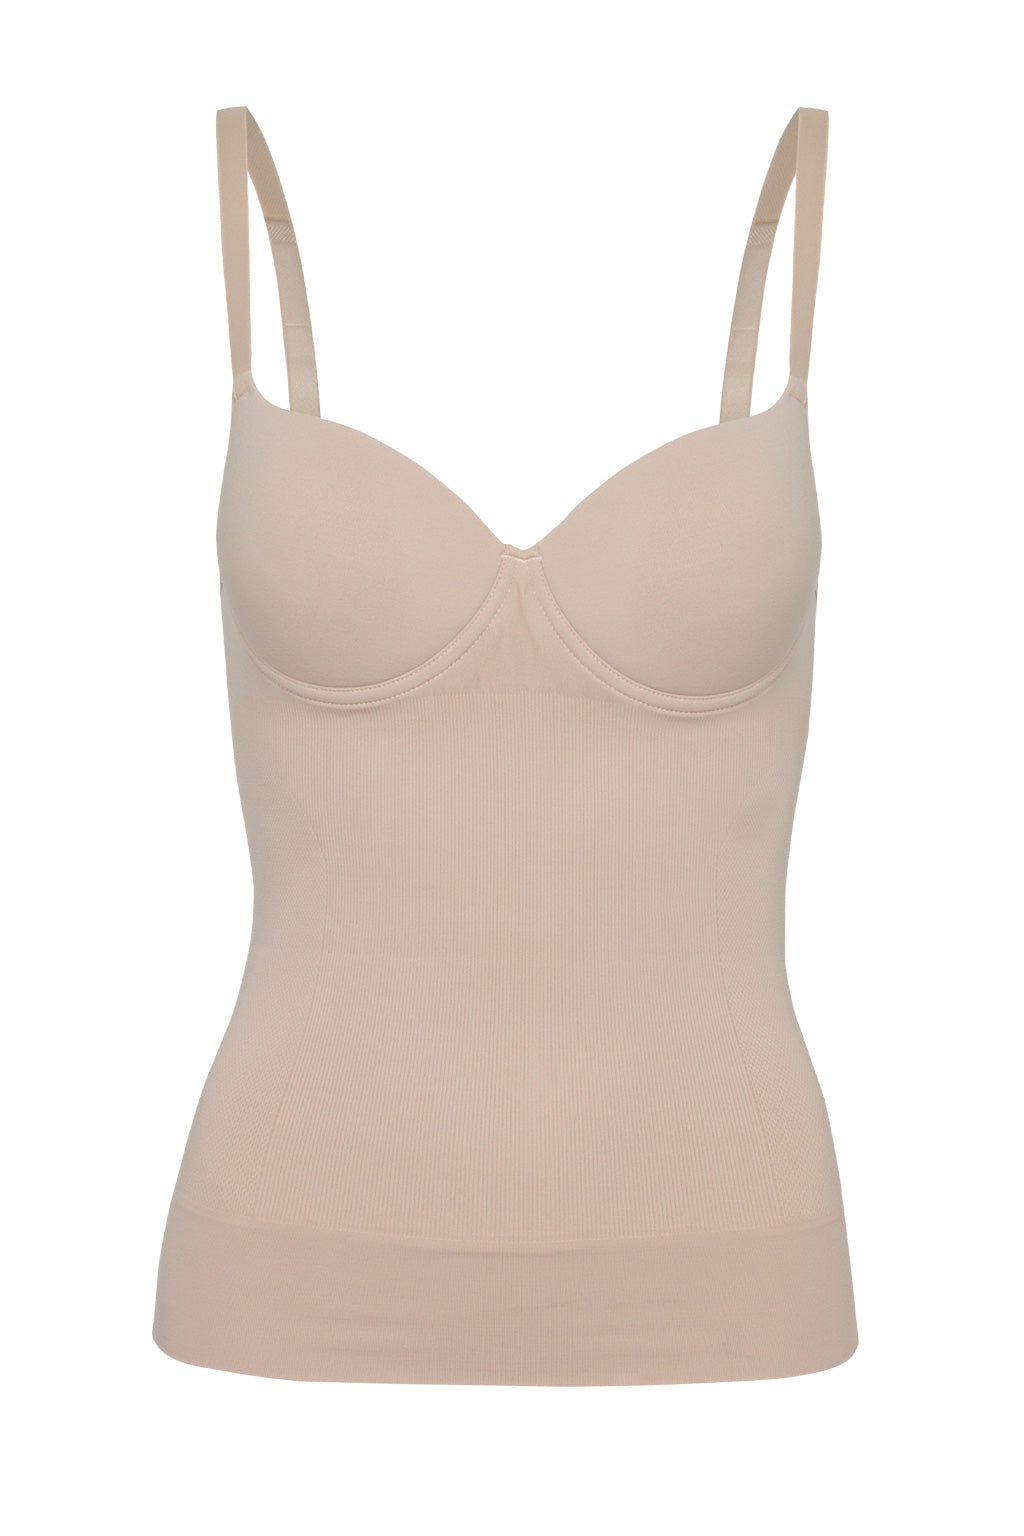 Plie Control Shaping Tank Body with padded Bra by Plie